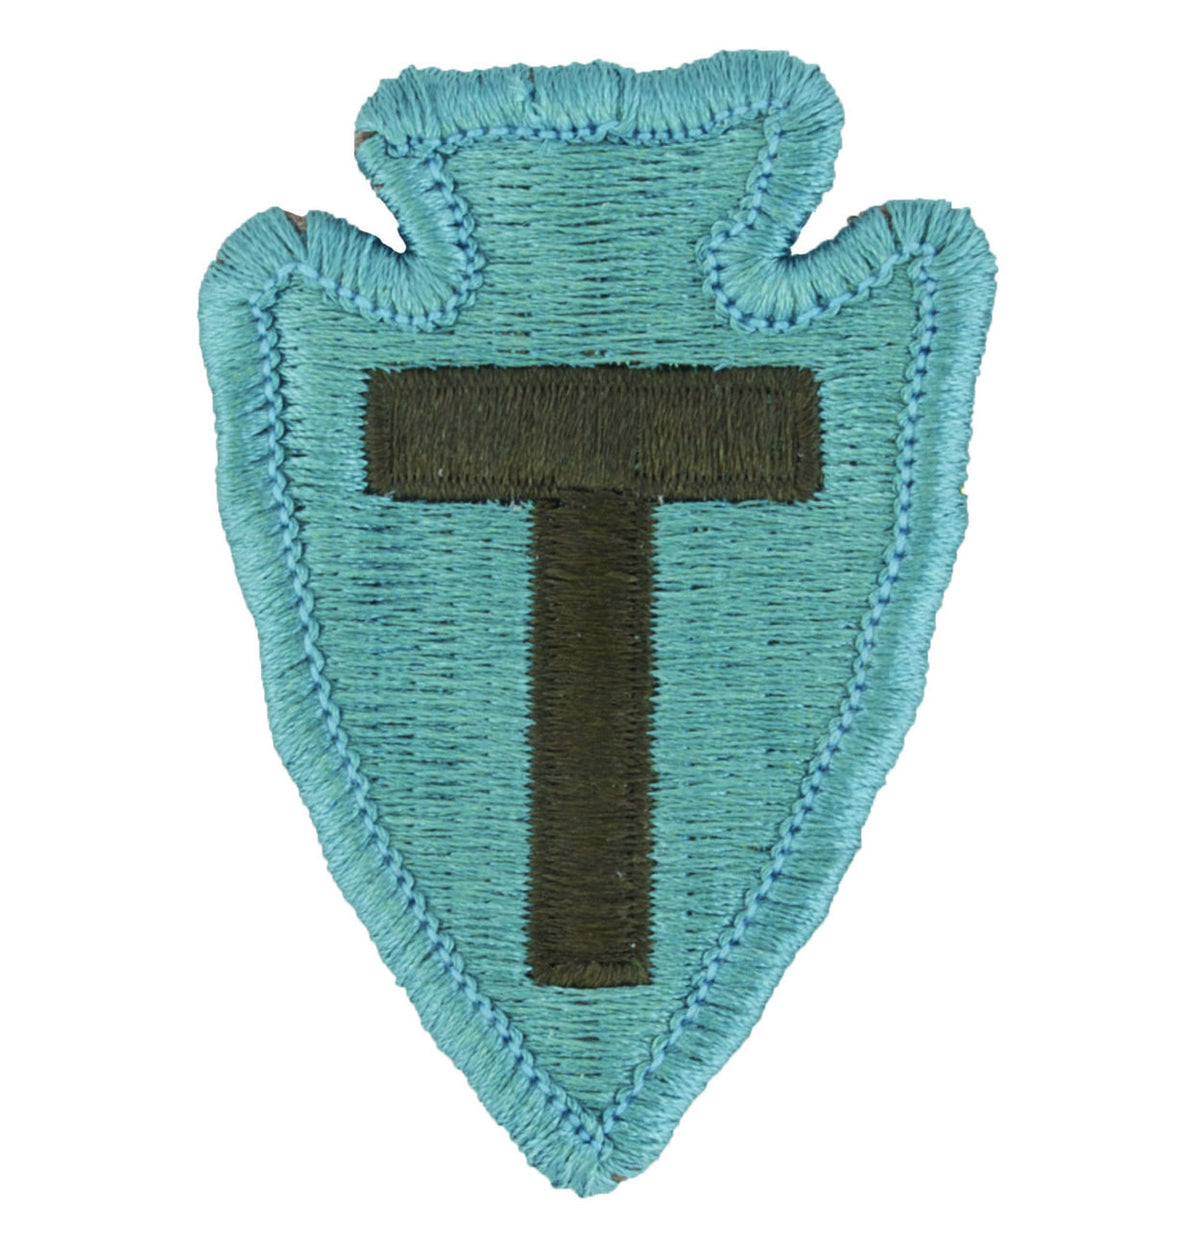 36th Infantry Division Patch - Full Color Dress Patch